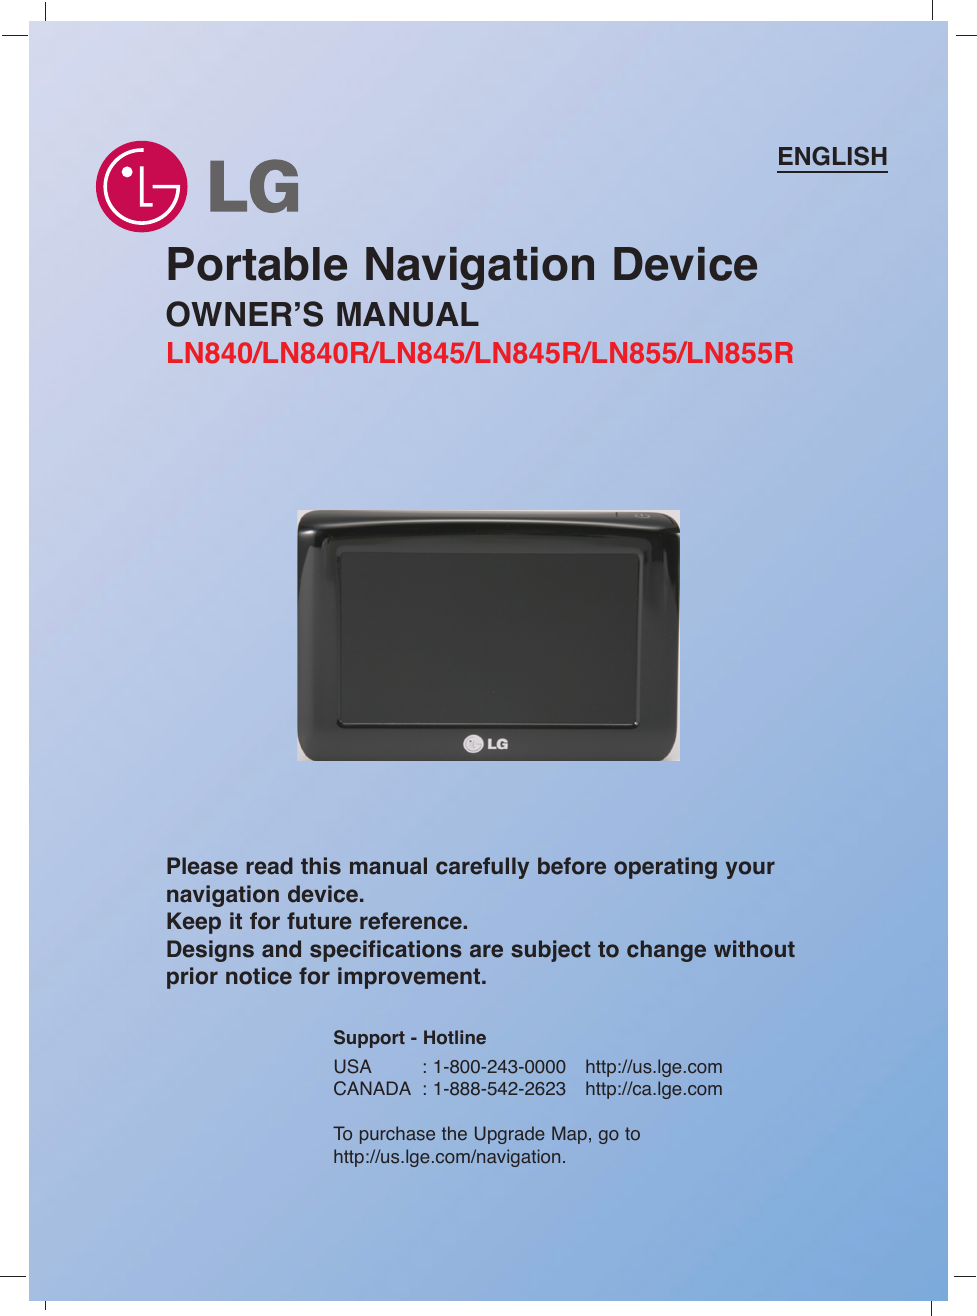 Portable Navigation DeviceOWNER’S MANUALLN840/LN840R/LN845/LN845R/LN855/LN855RENGLISHPlease read this manual carefully before operating yournavigation device. Keep it for future reference.Designs and specifications are subject to change withoutprior notice for improvement.Support - HotlineUSA : 1-800-243-0000 http://us.lge.comCANADA : 1-888-542-2623 http://ca.lge.comTo  purchase the Upgrade Map, go tohttp://us.lge.com/navigation.